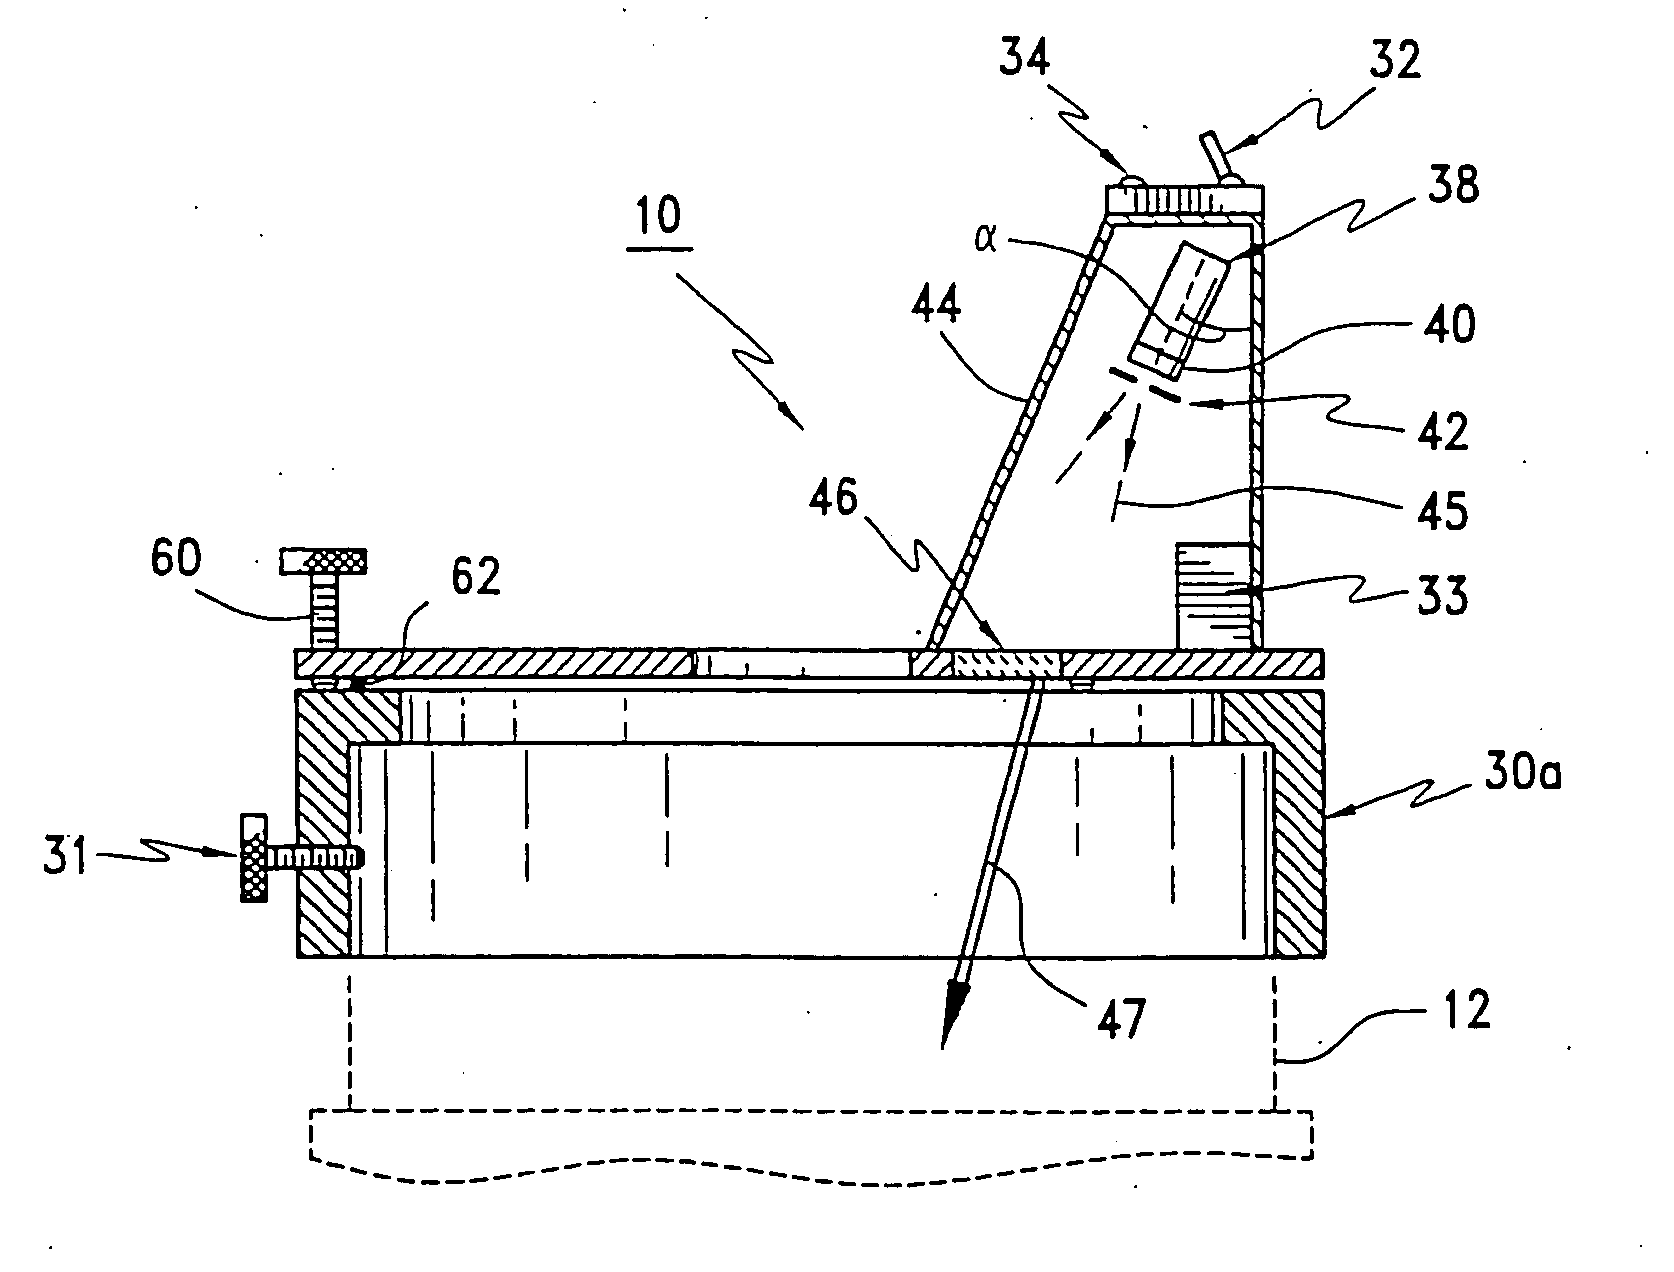 Artificial star generation apparatus and method for telescope systems